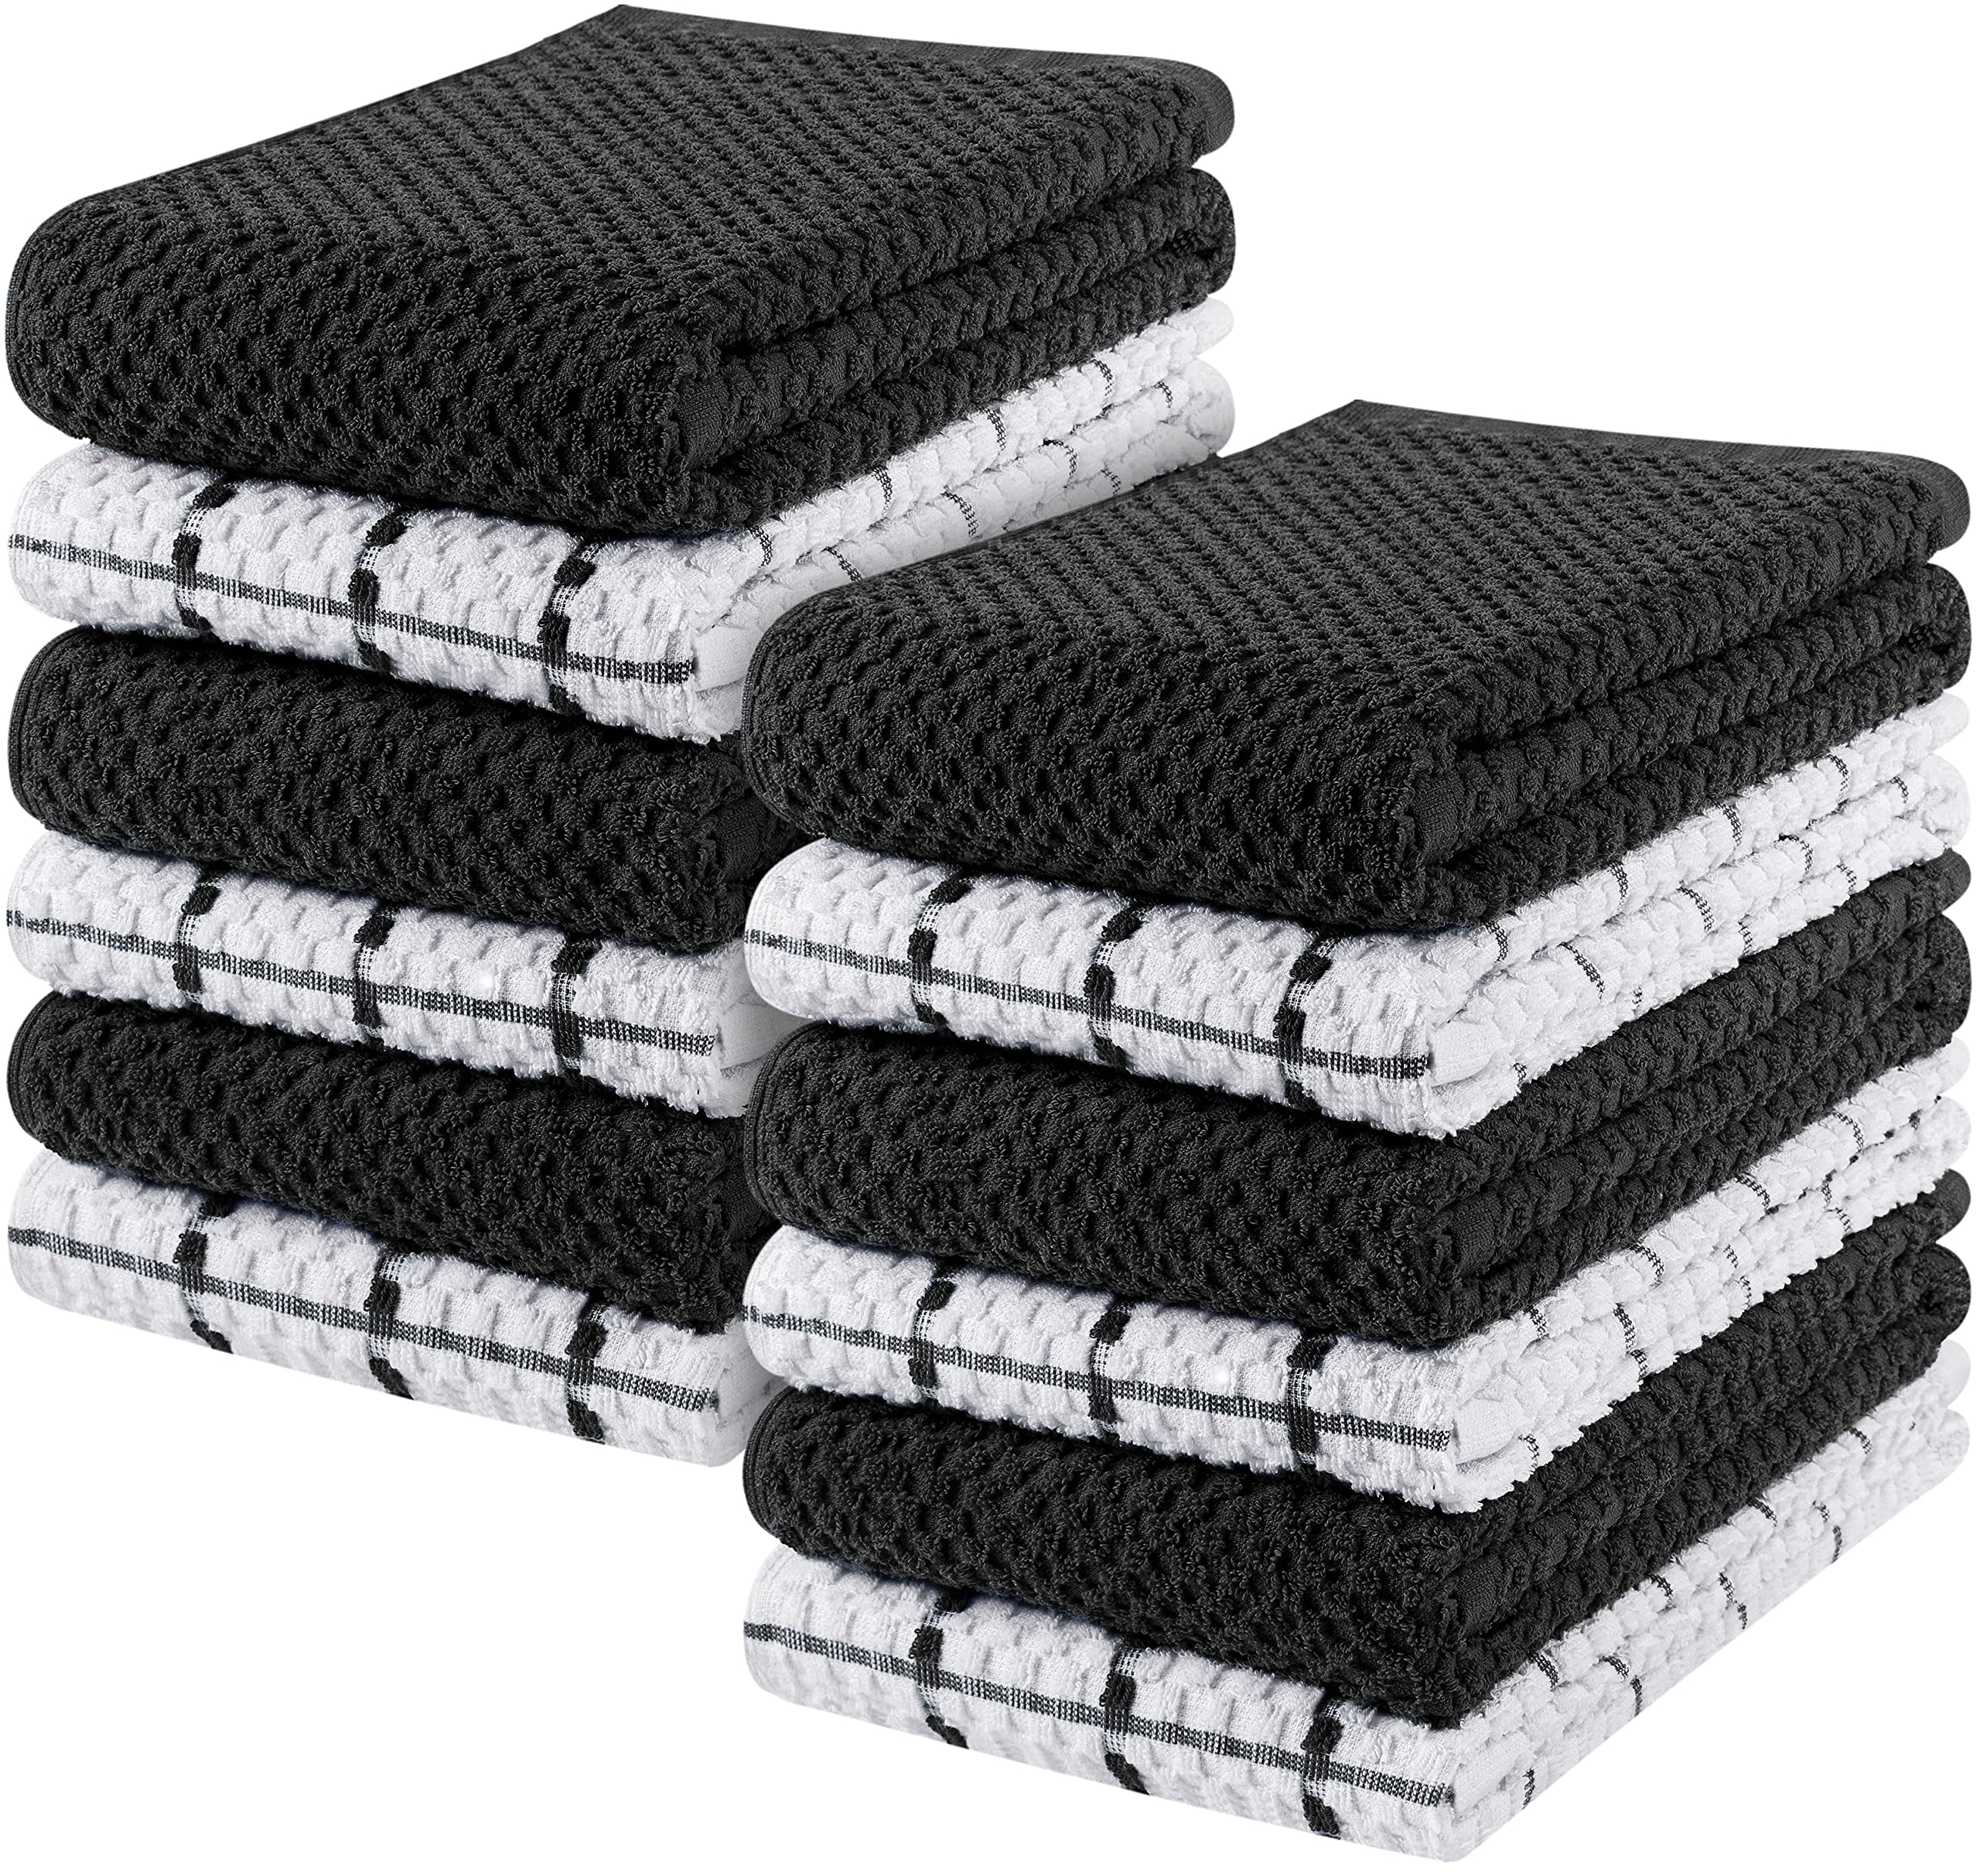 Utopia Towels Kitchen Towels [12 Pack], 15 x 25 Inches, 100% Ring Spun Cotton Super Soft and Absorbent Linen Dish Towels, Tea Towels and Bar Towels Set (Black)